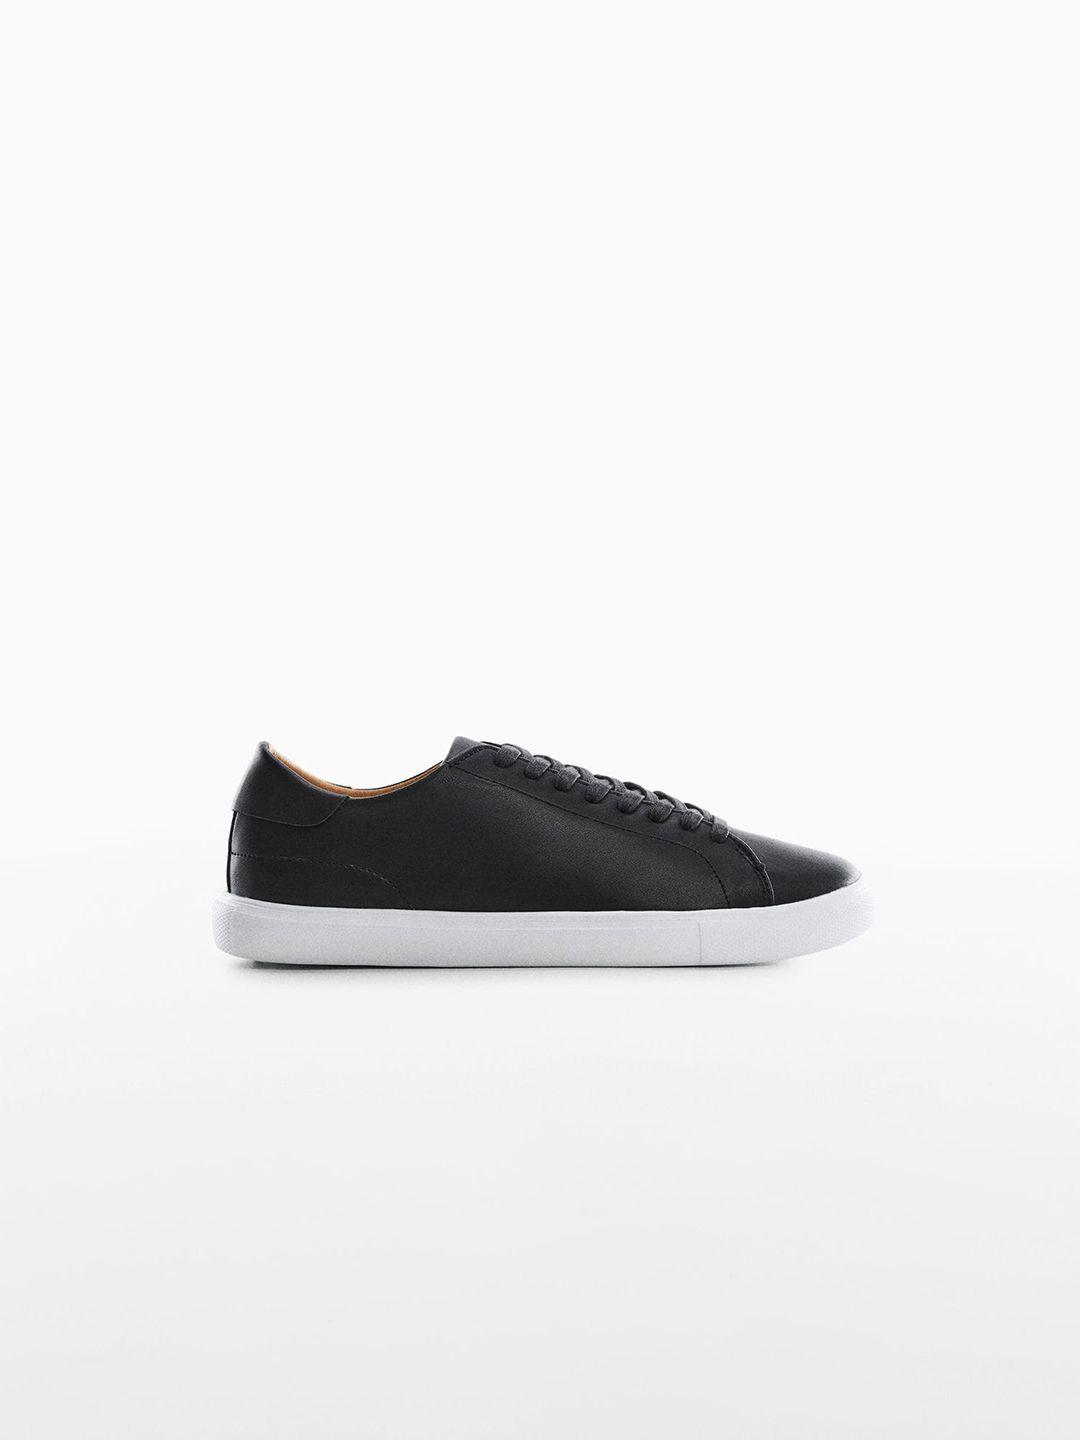 mango man leather sustainable sneakers